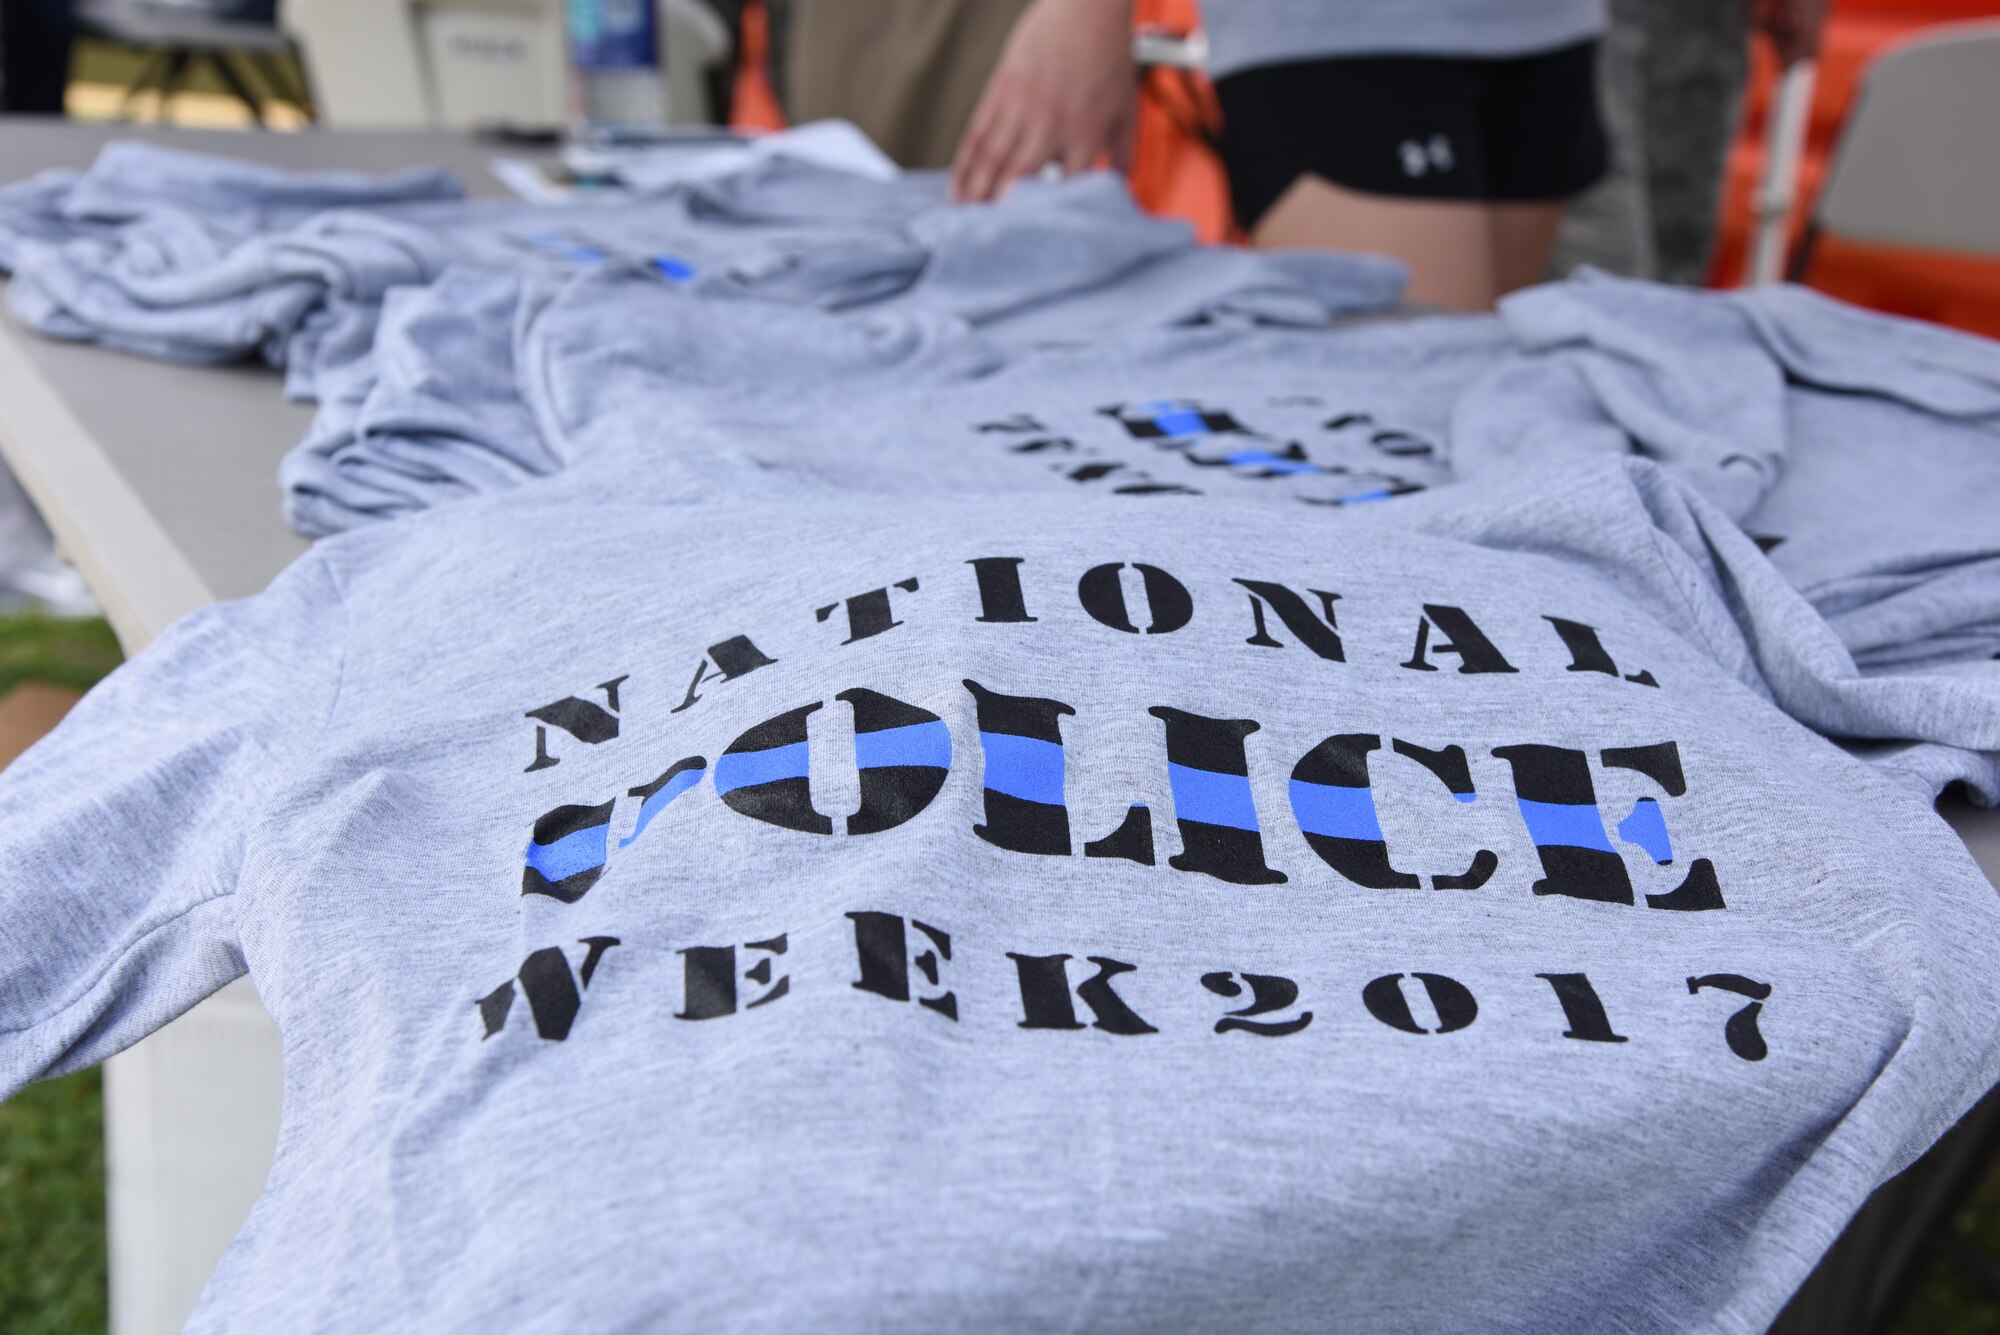 National Police Week t-shirts’ sit on display during the 81st Security Forces Squadron Police Week fun day at the Base Exchange May 18, 2017, on Keesler Air Force Base, Miss. The event was held during National Police Week, which recognizes the service of law enforcement men and women who put their lives at risk every day. (U.S. Air Force photo by Kemberly Groue)